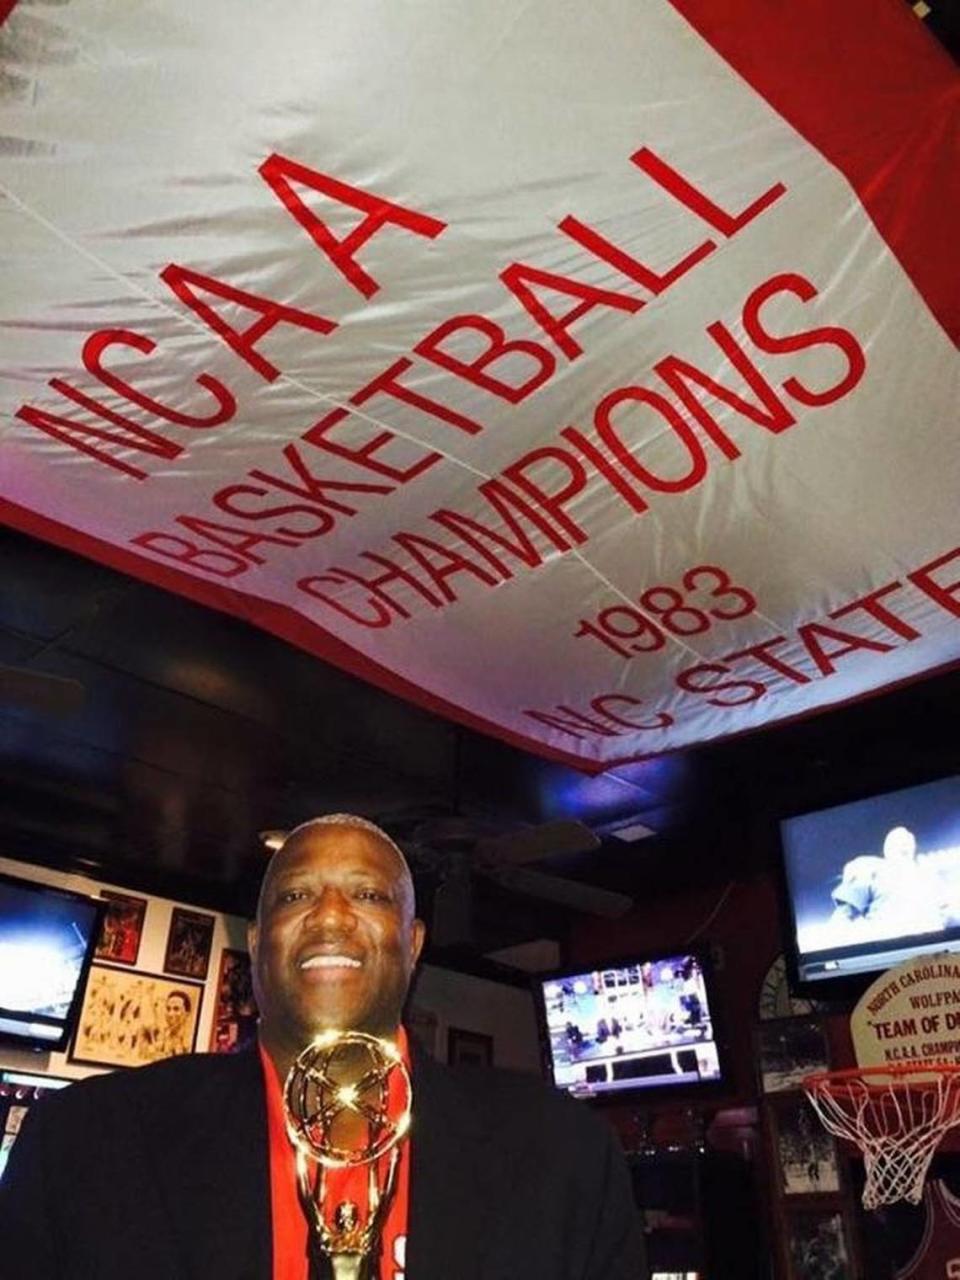 Dereck Whittenburg, of the NC State stars of 1983, stands underneath a championship banner at Amedeo’s as he displayed the Emmy won from ESPN’s 30 for 30 documentary “Survive and Advance.”